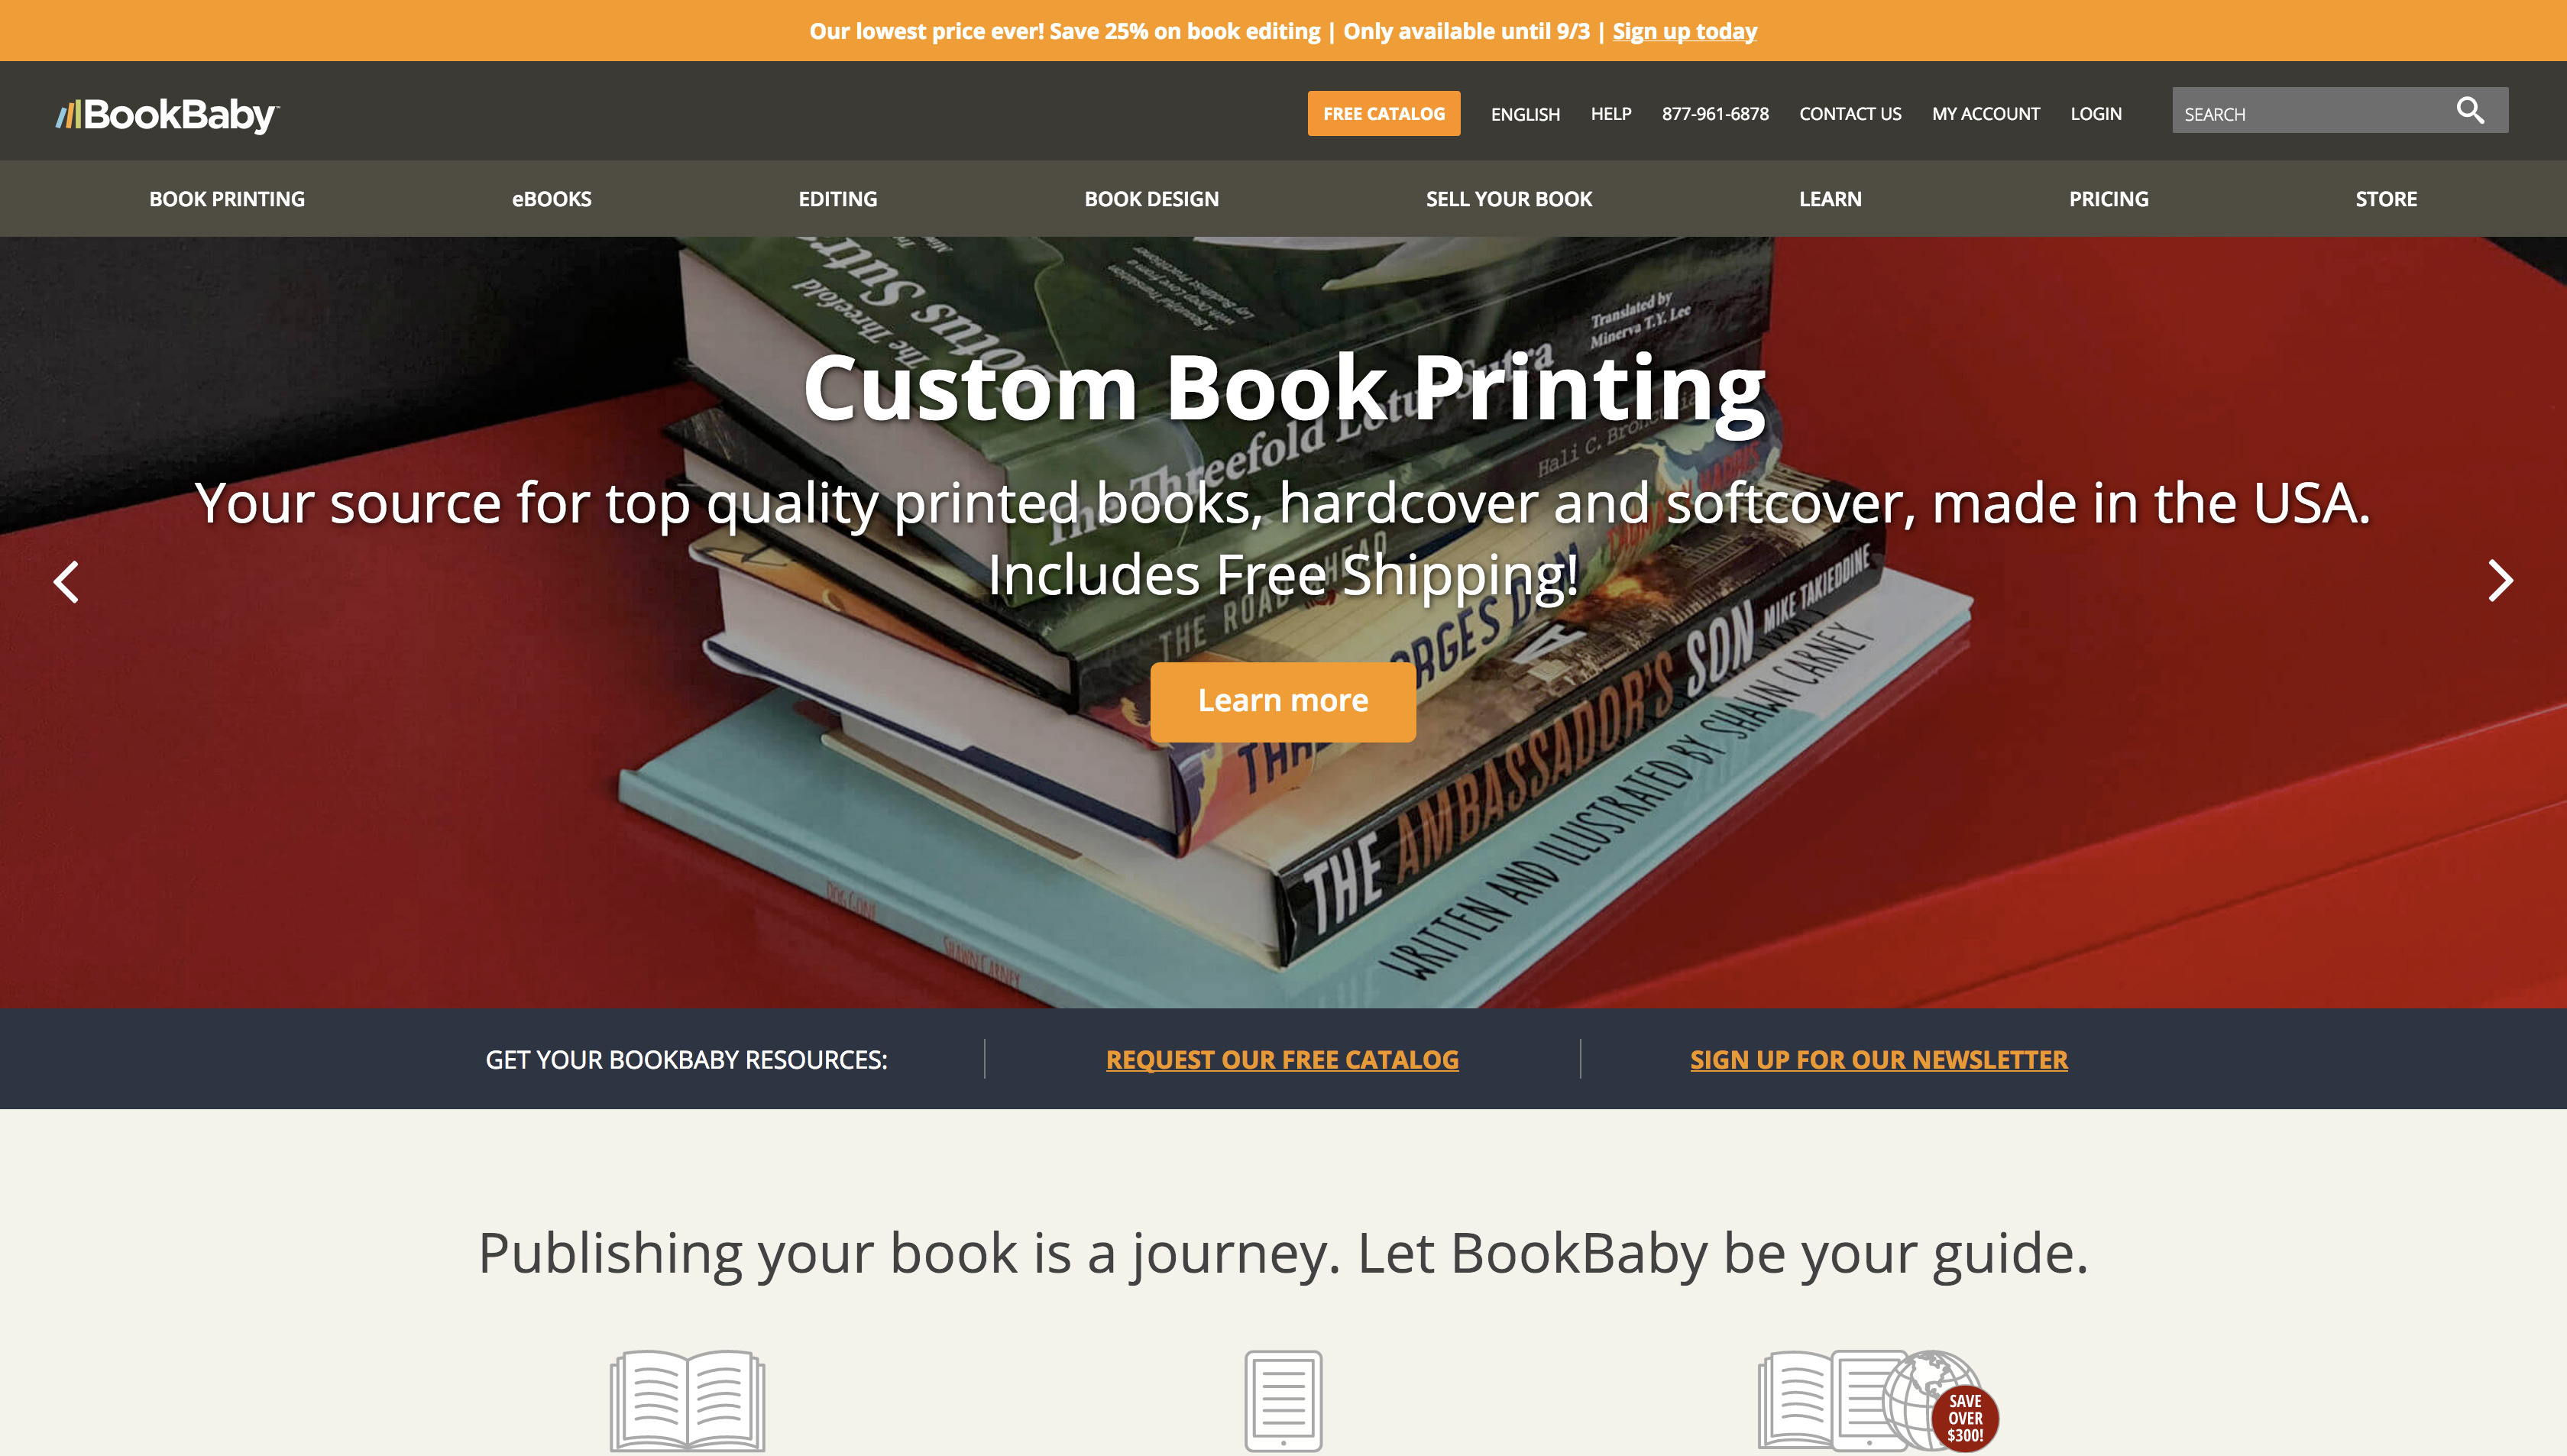 Stillehavsøer ornament kolbøtte What you need to know about print-on-demand book publishing | by Andrew  Couldwell | How to self-publish a book | Medium